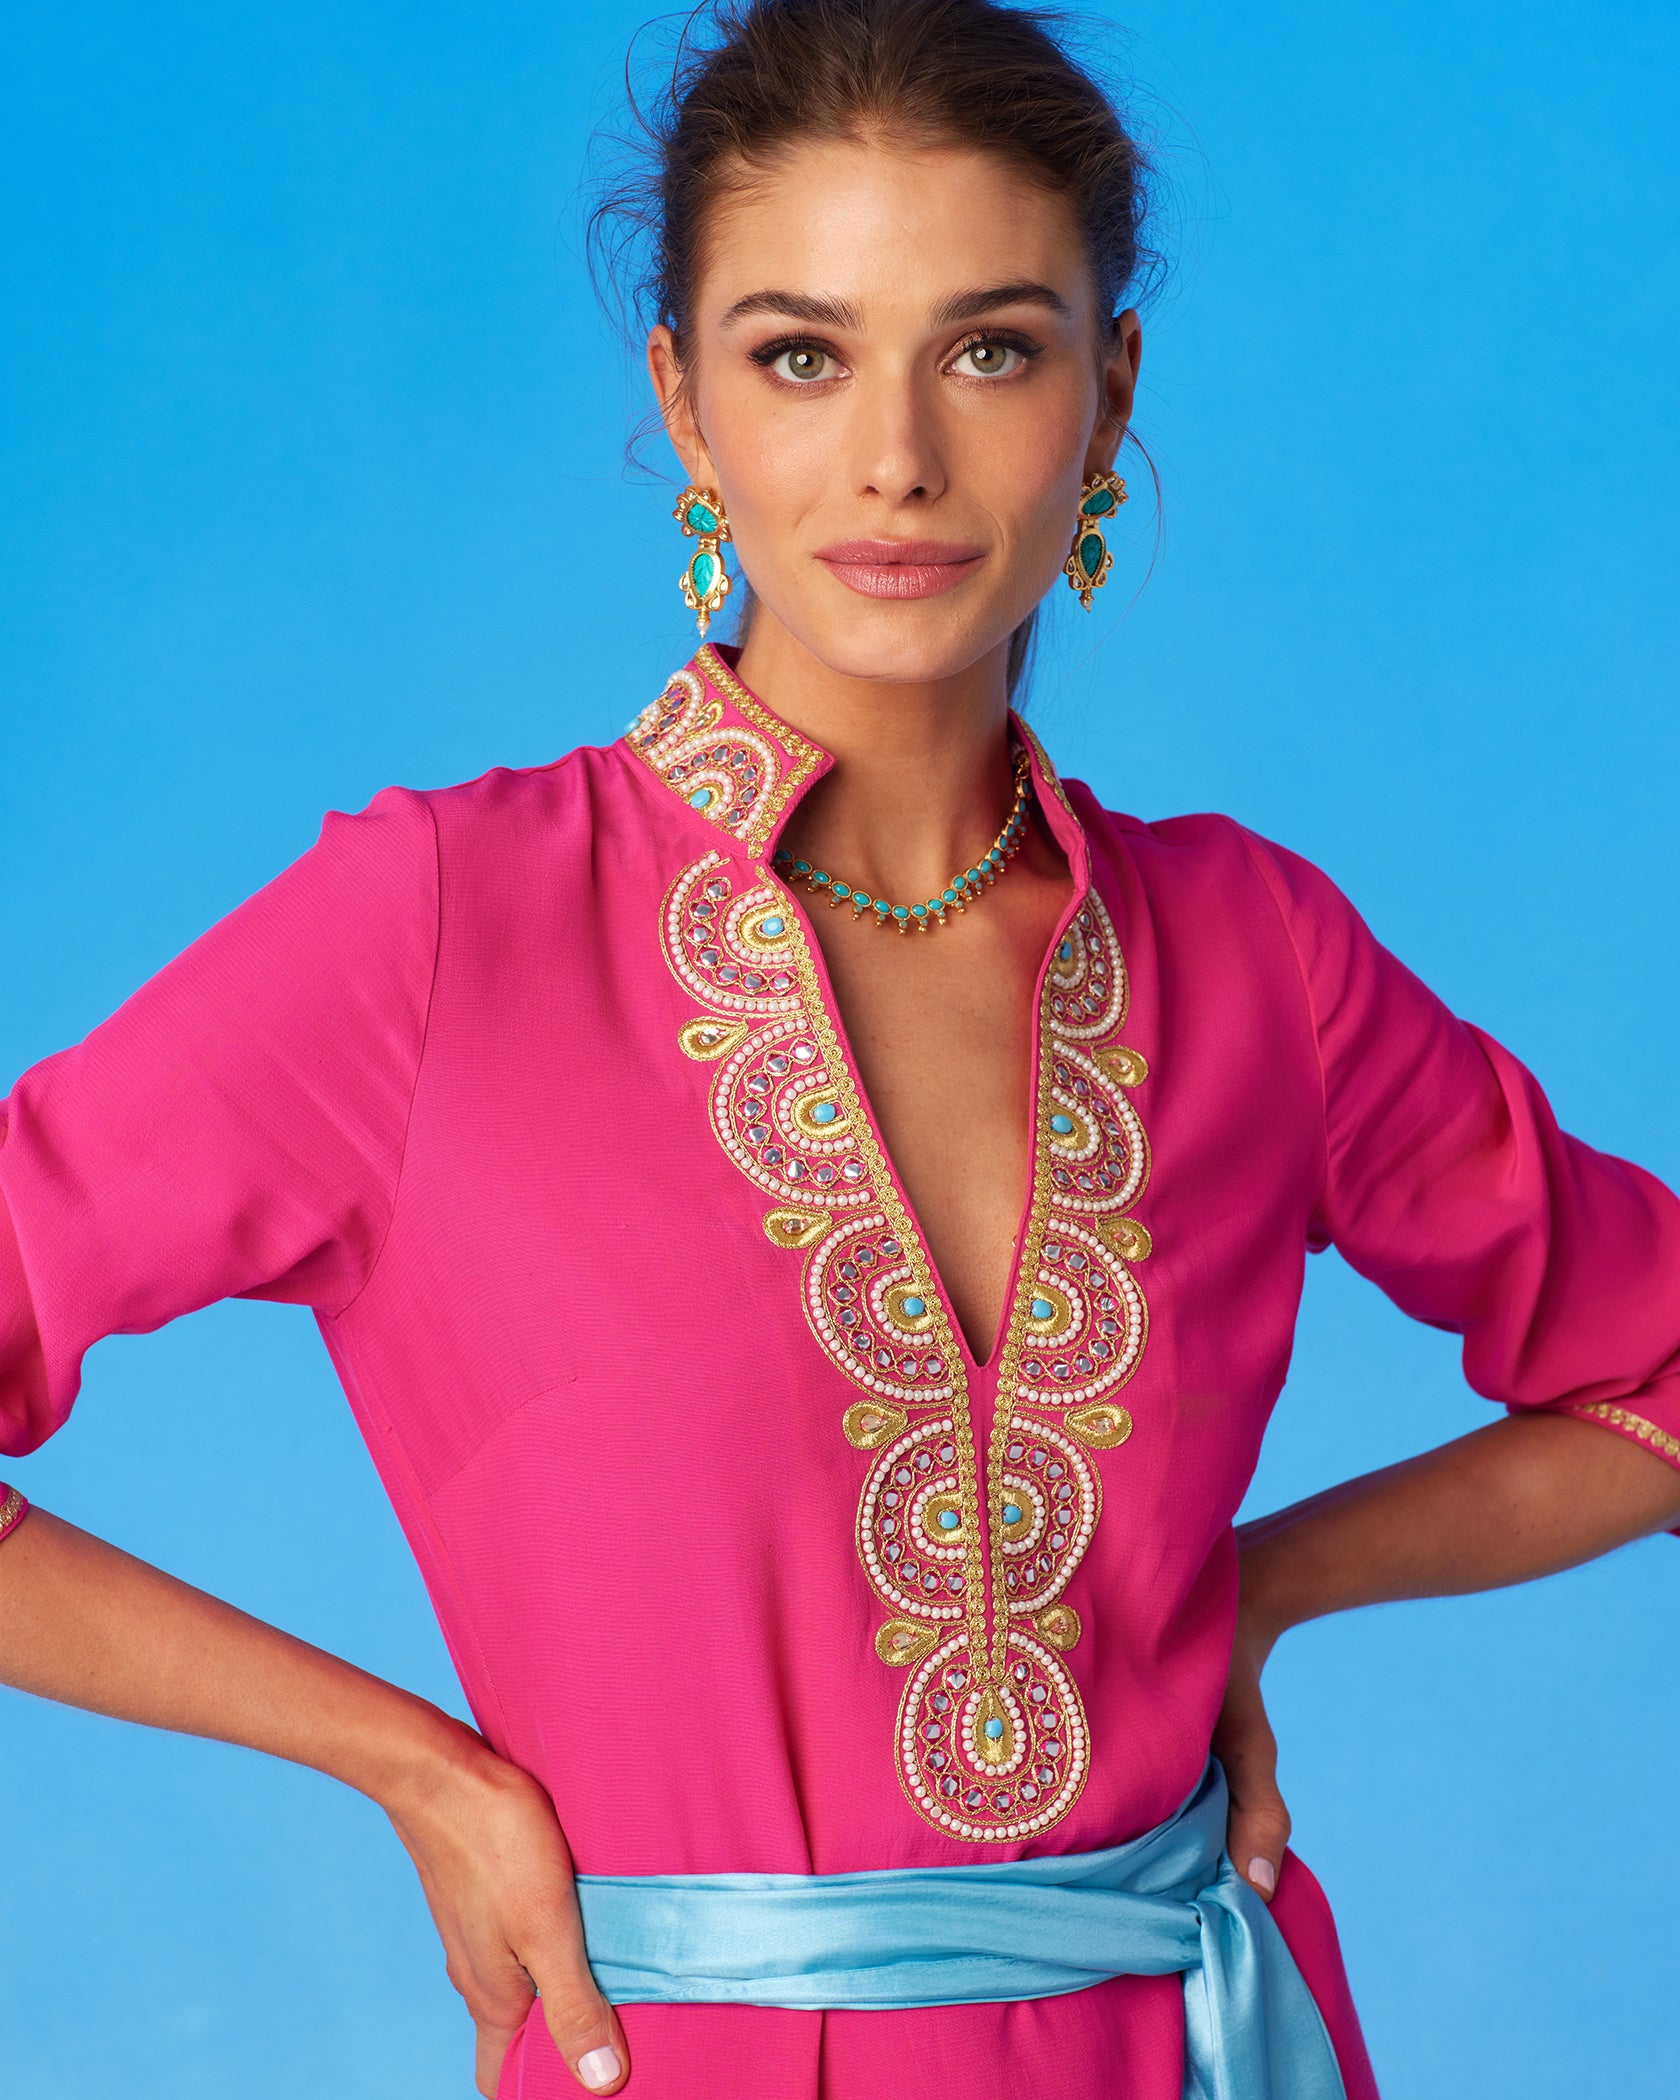 Noor Long Hot Pink Tunic Dress with Gold Embellishment-Portrait